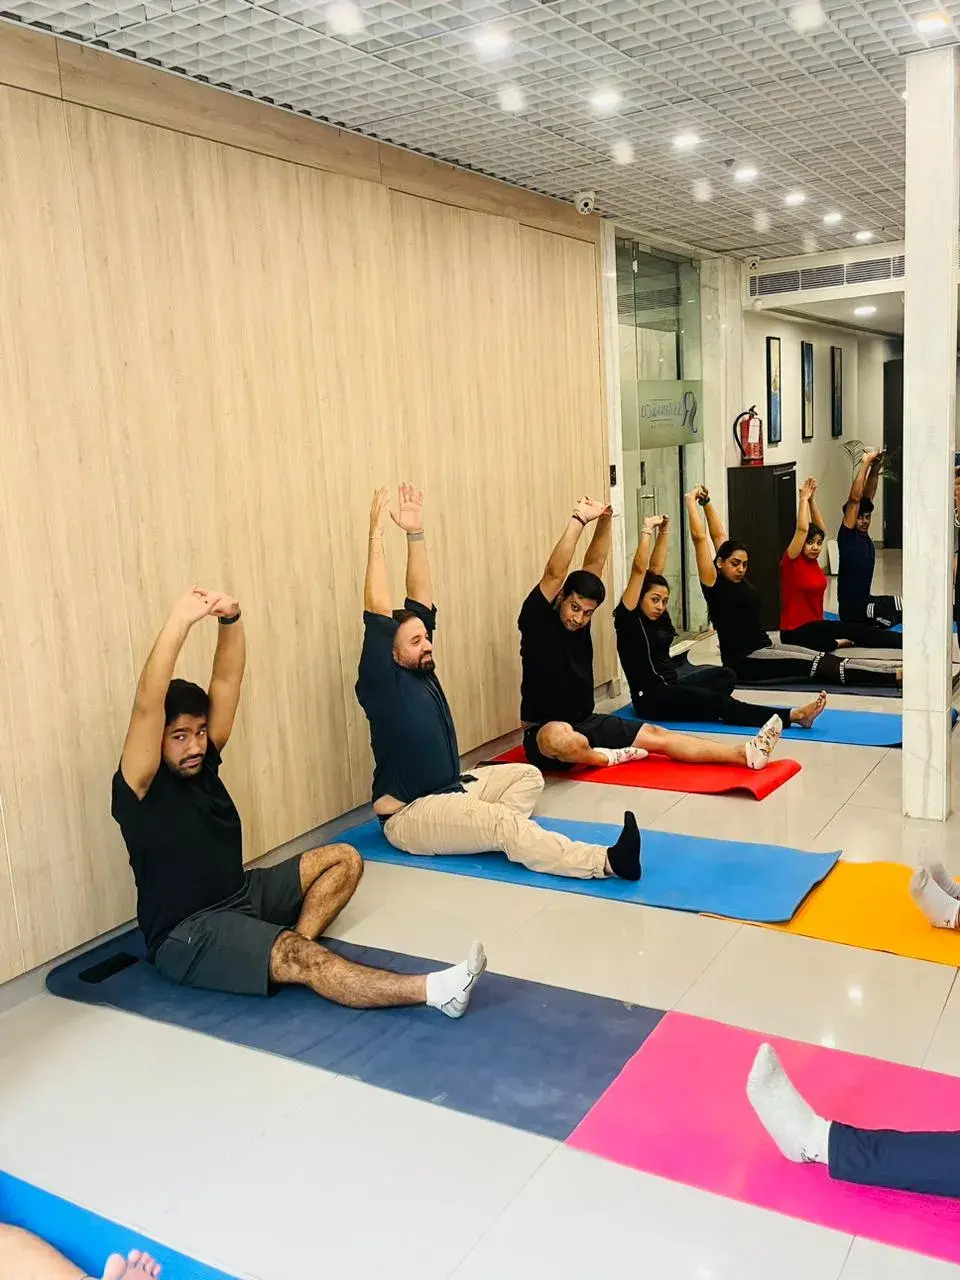 employees participated in yoga